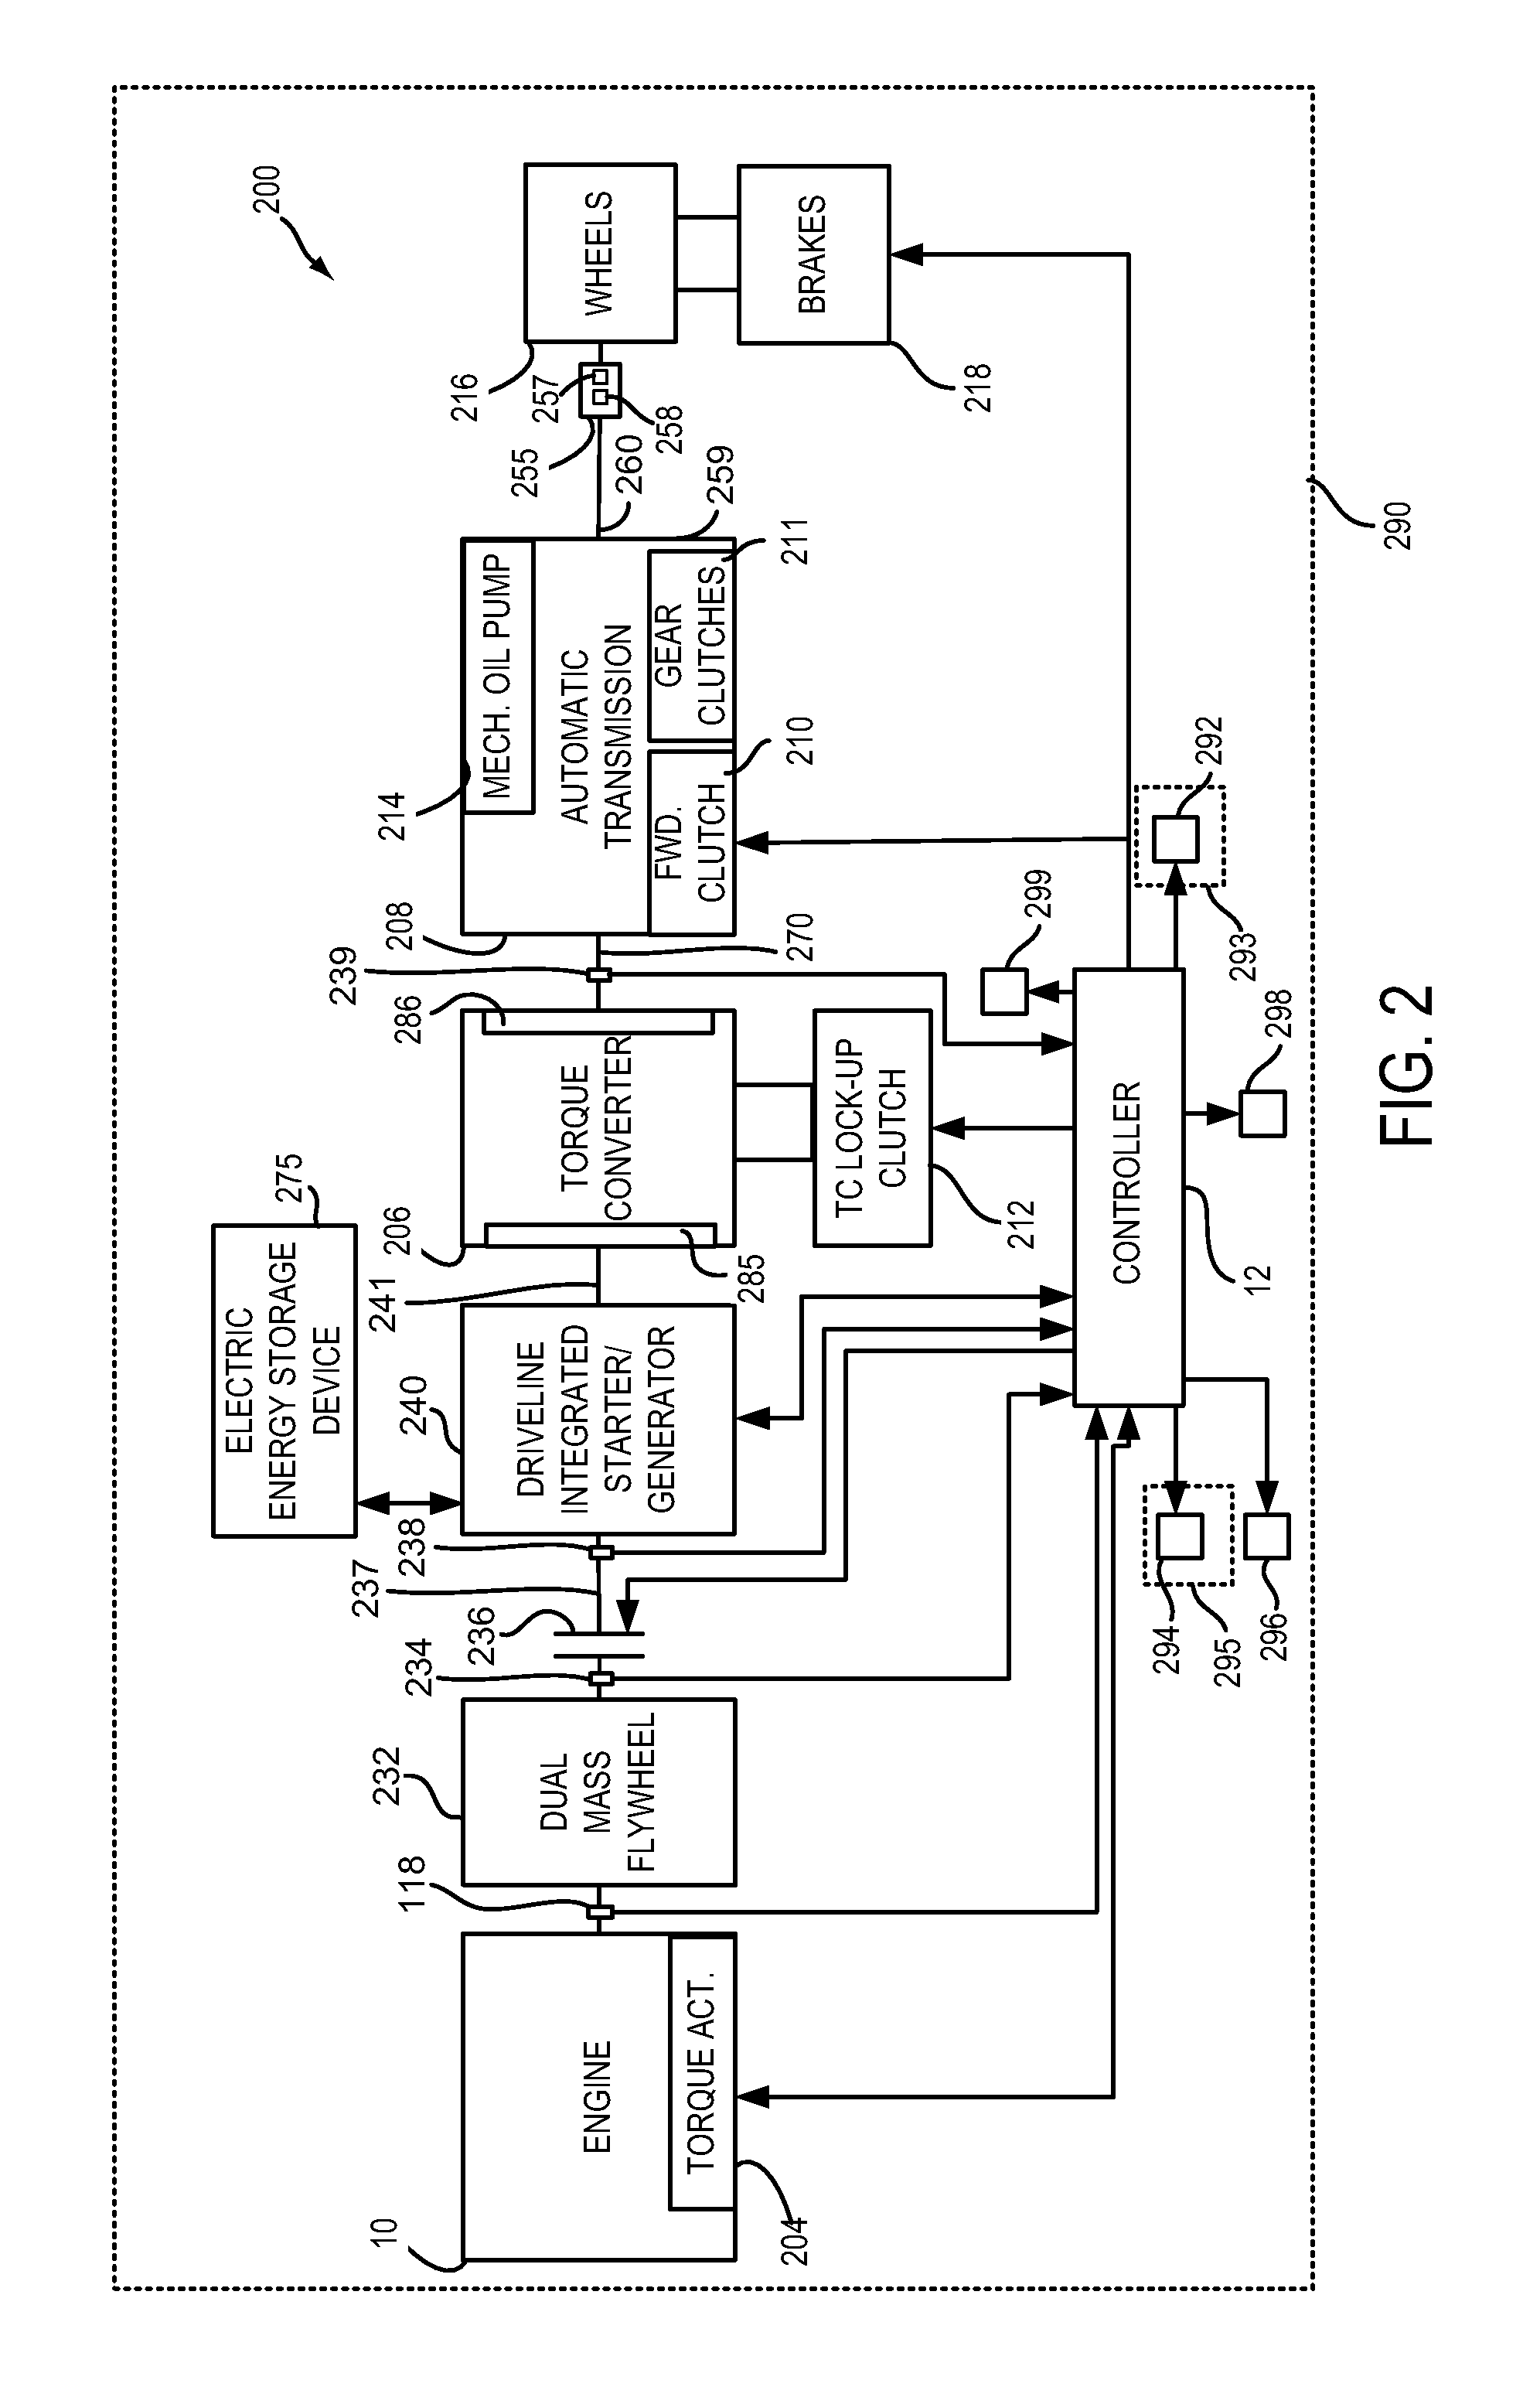 Methods and systems for launching a vehicle